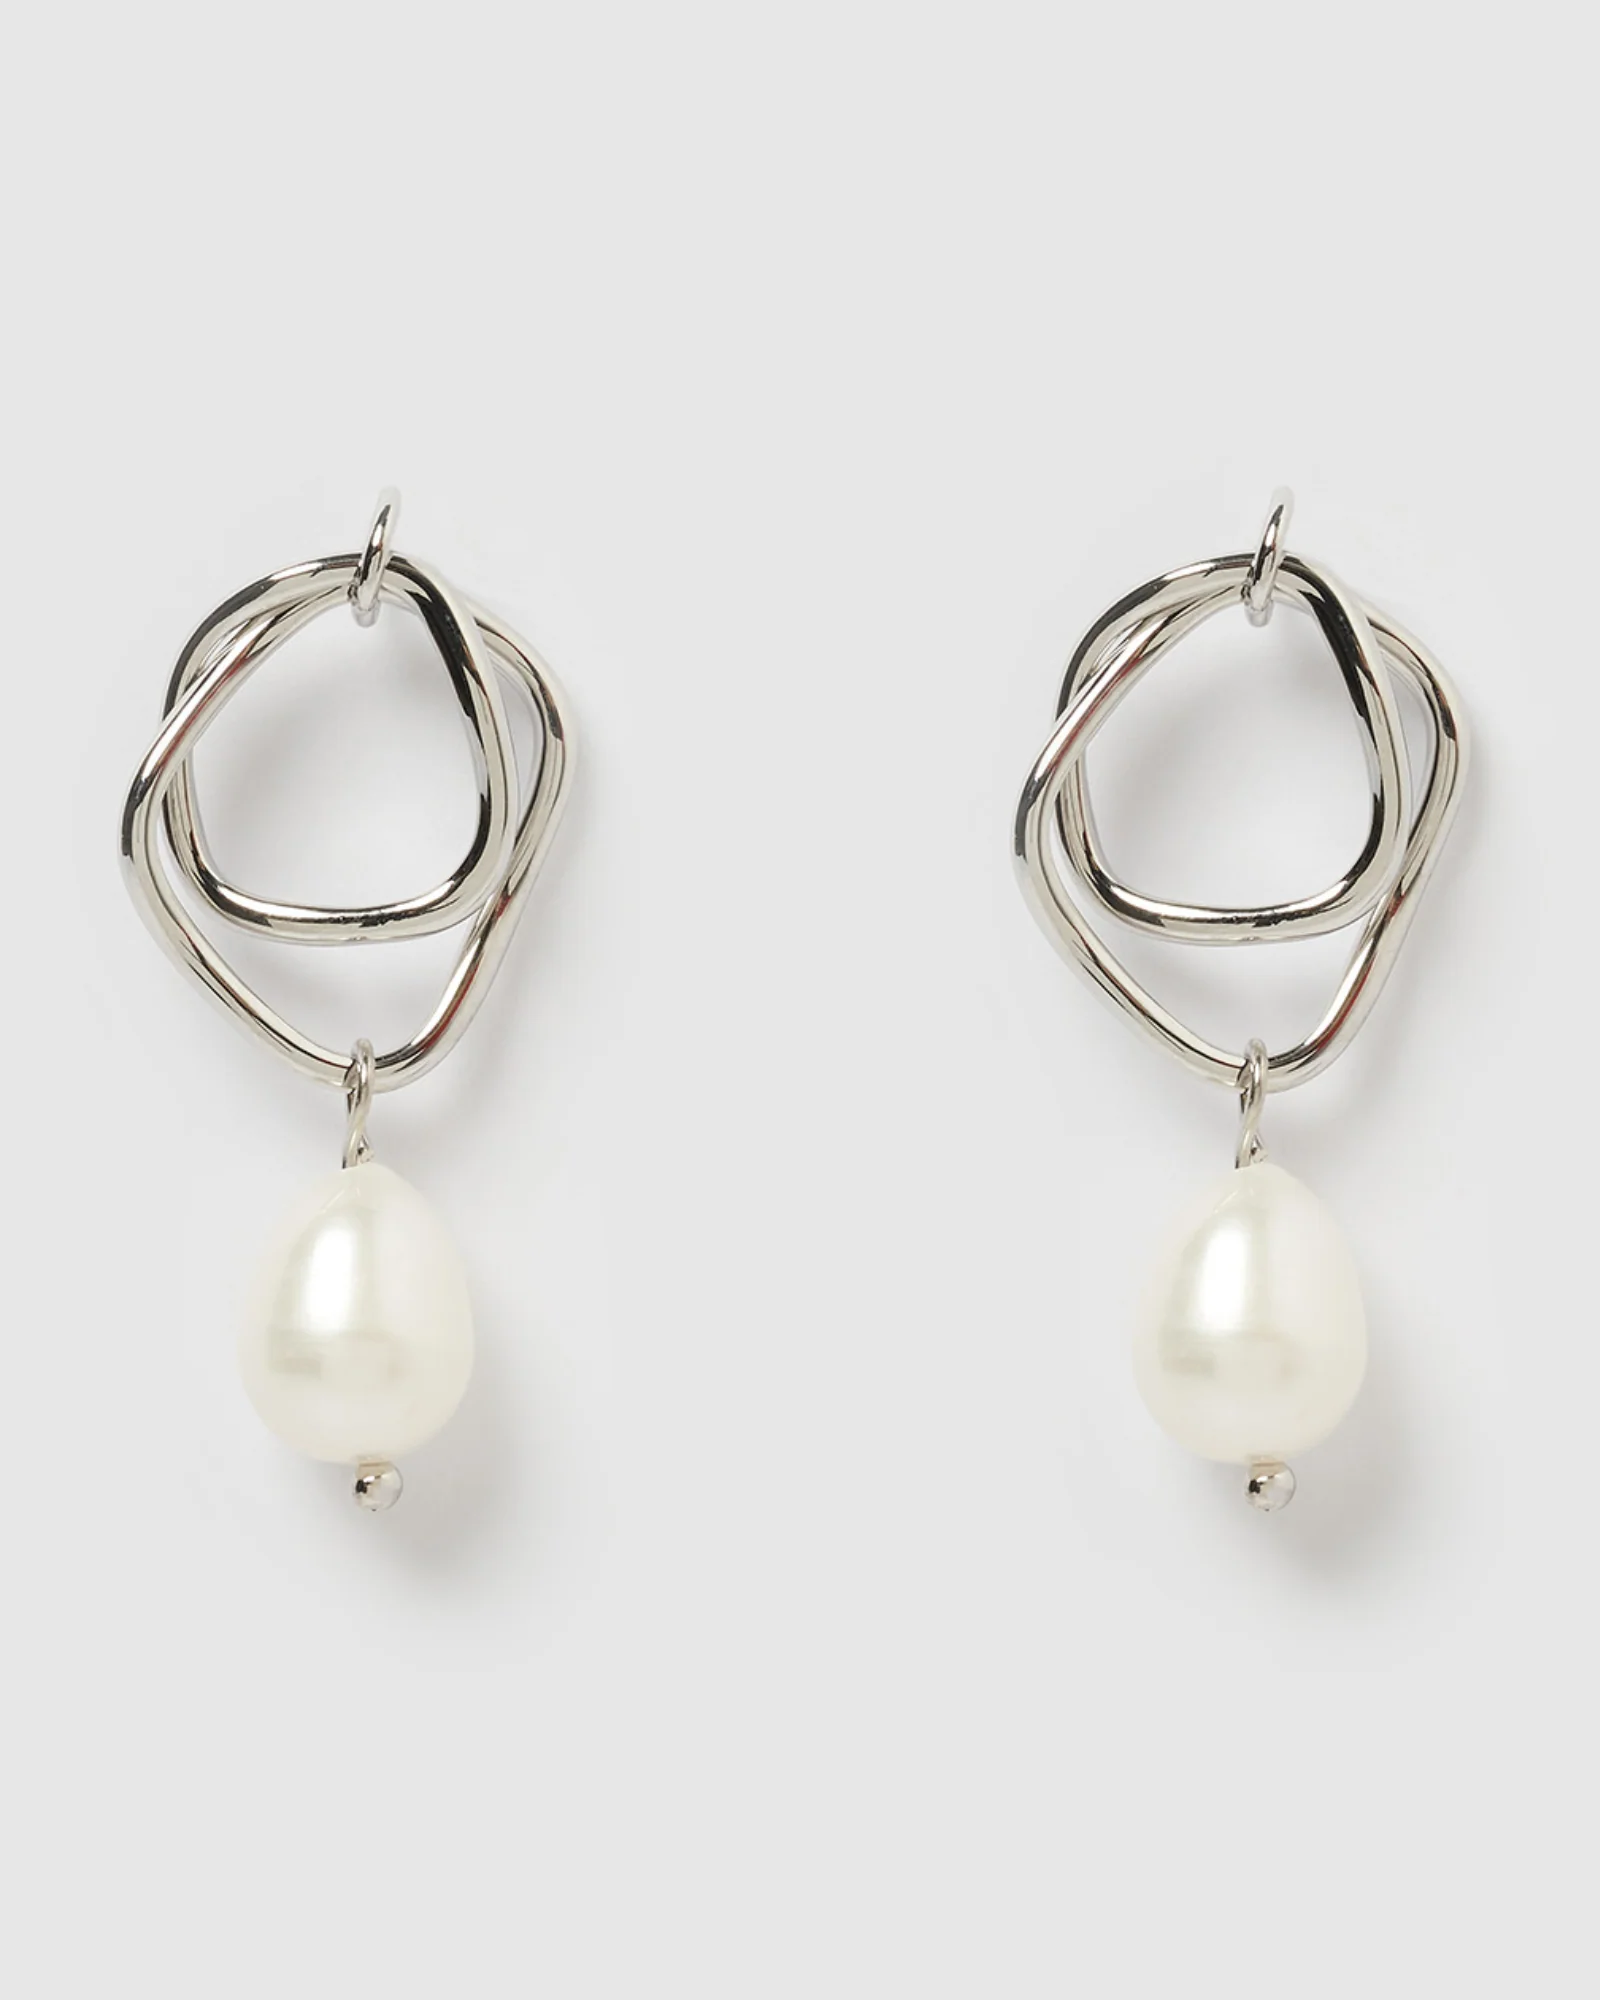 You are currently viewing Timeless Elegance: The Allure of Silver and Pearl Earrings